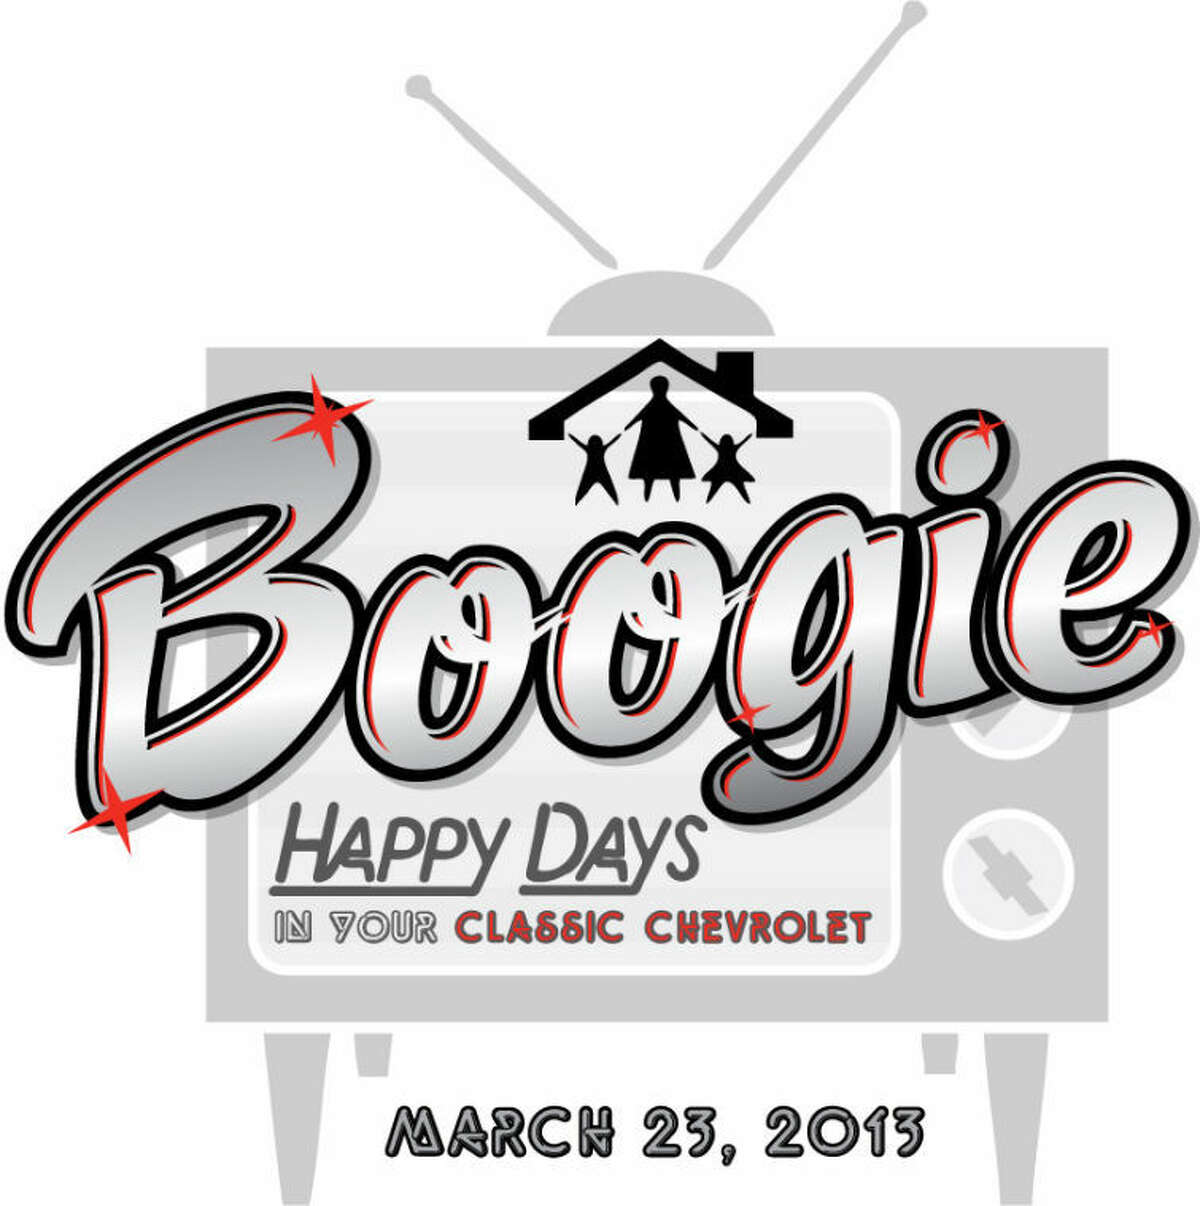 Tune in to Boogie 2013 “Happy Days in Your Classic Chevrolet” March 23 at Stafford Centre